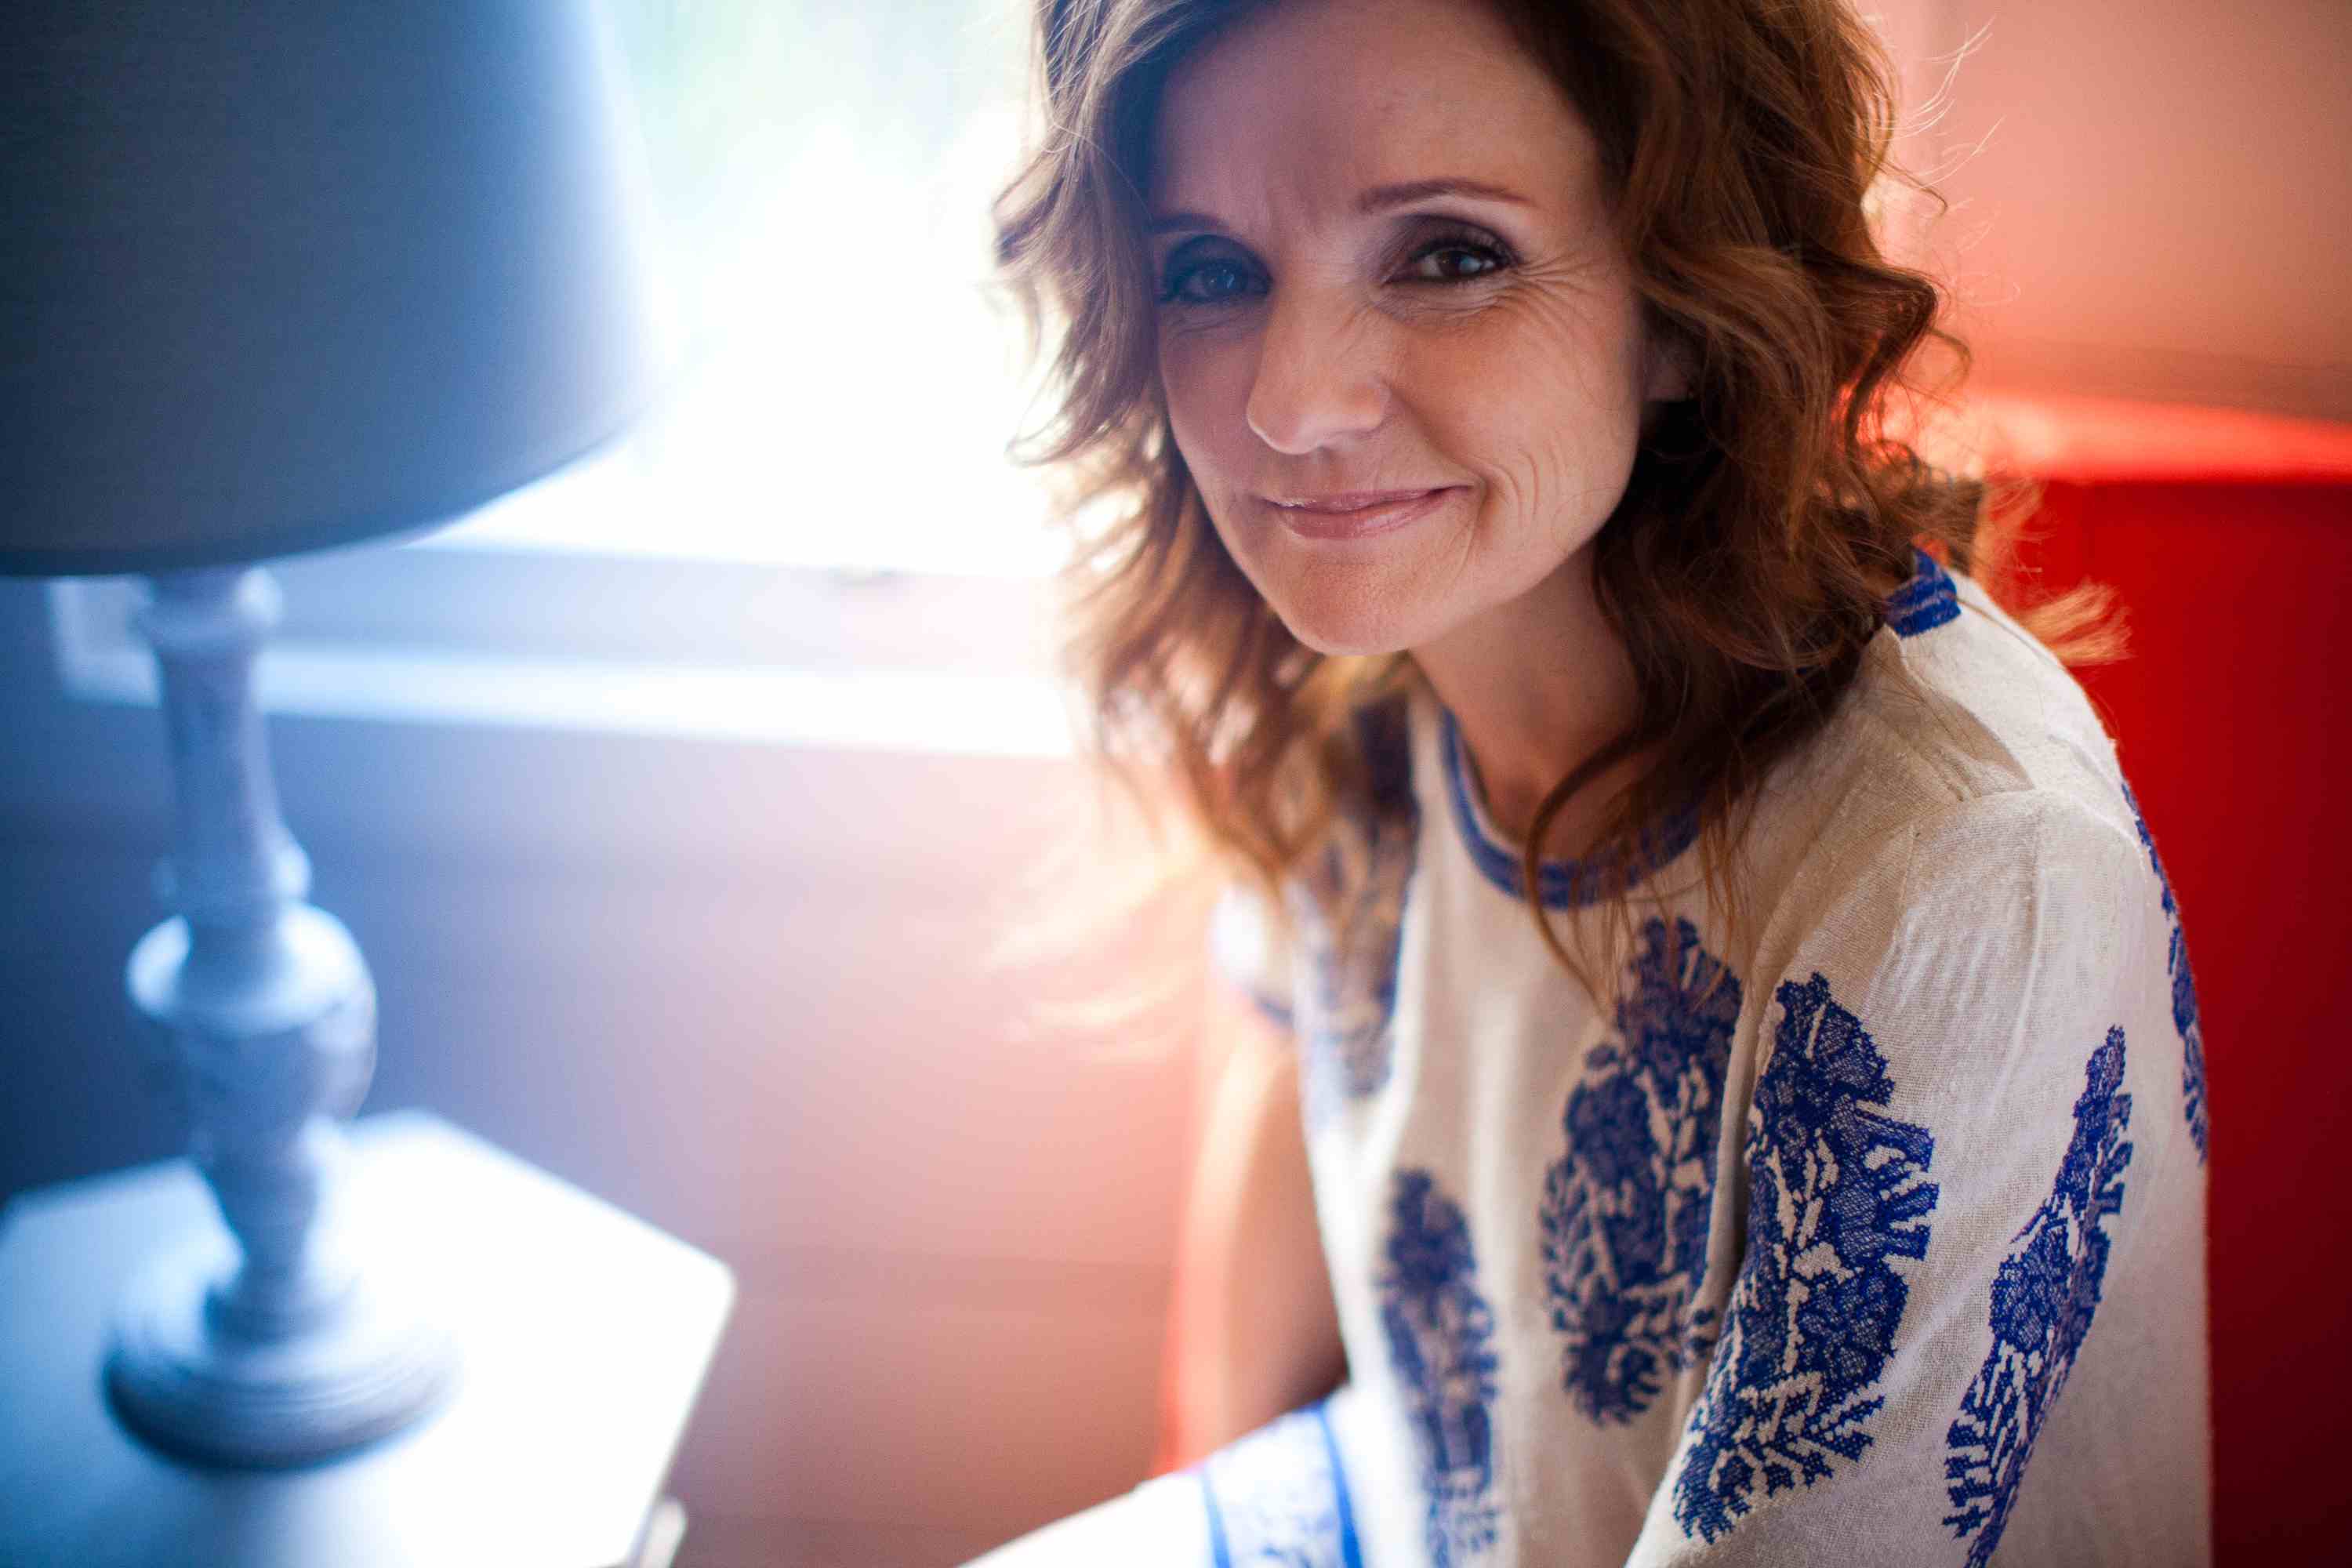 Track Review: Patty Griffin (with Robert Plant), “Ohio”